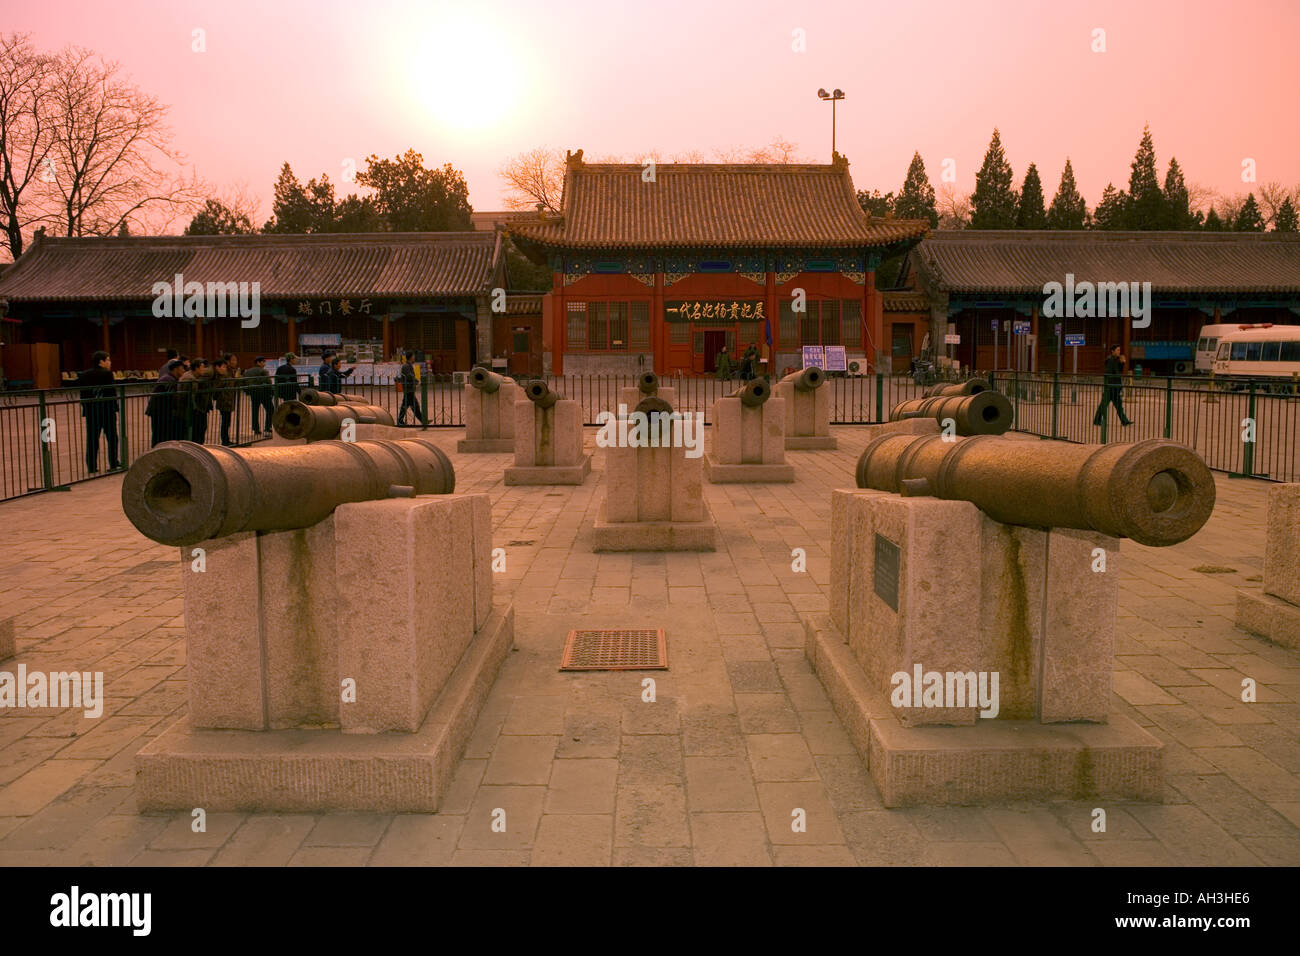 Les canons Forbidden City Beijing Chine Banque D'Images